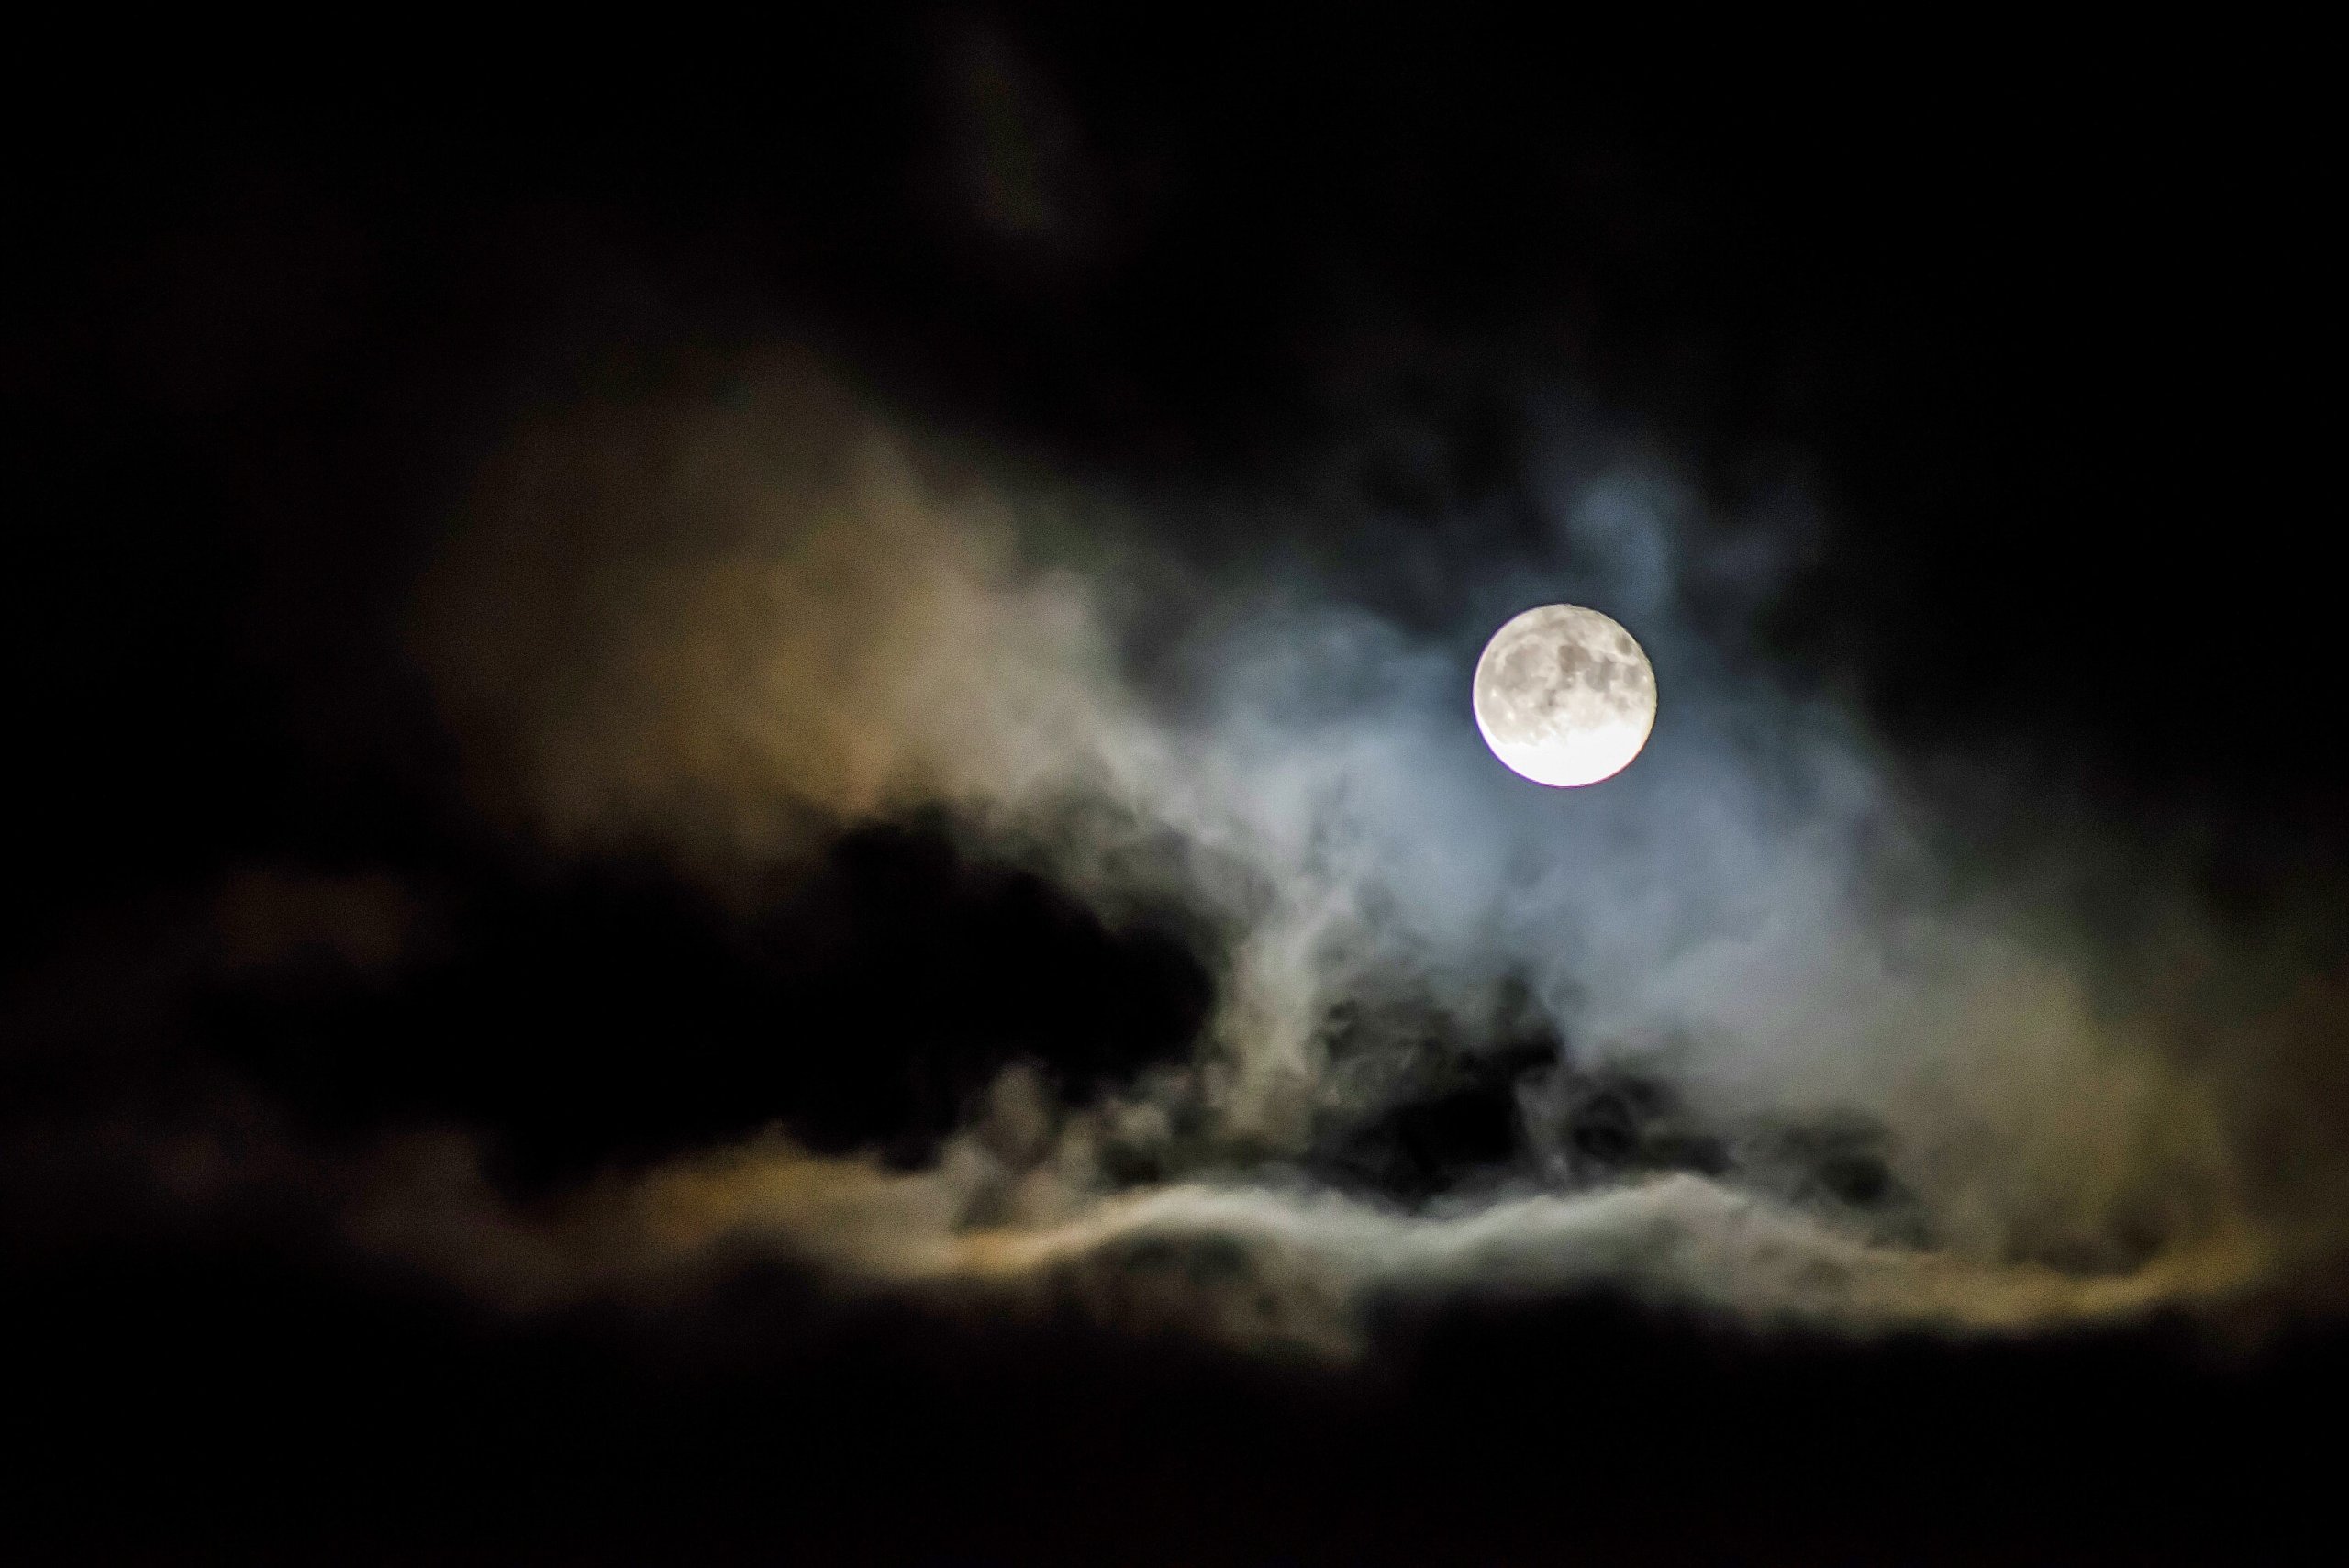 Pexels image of black sky lightened by a full white moon with faint clouds floating past